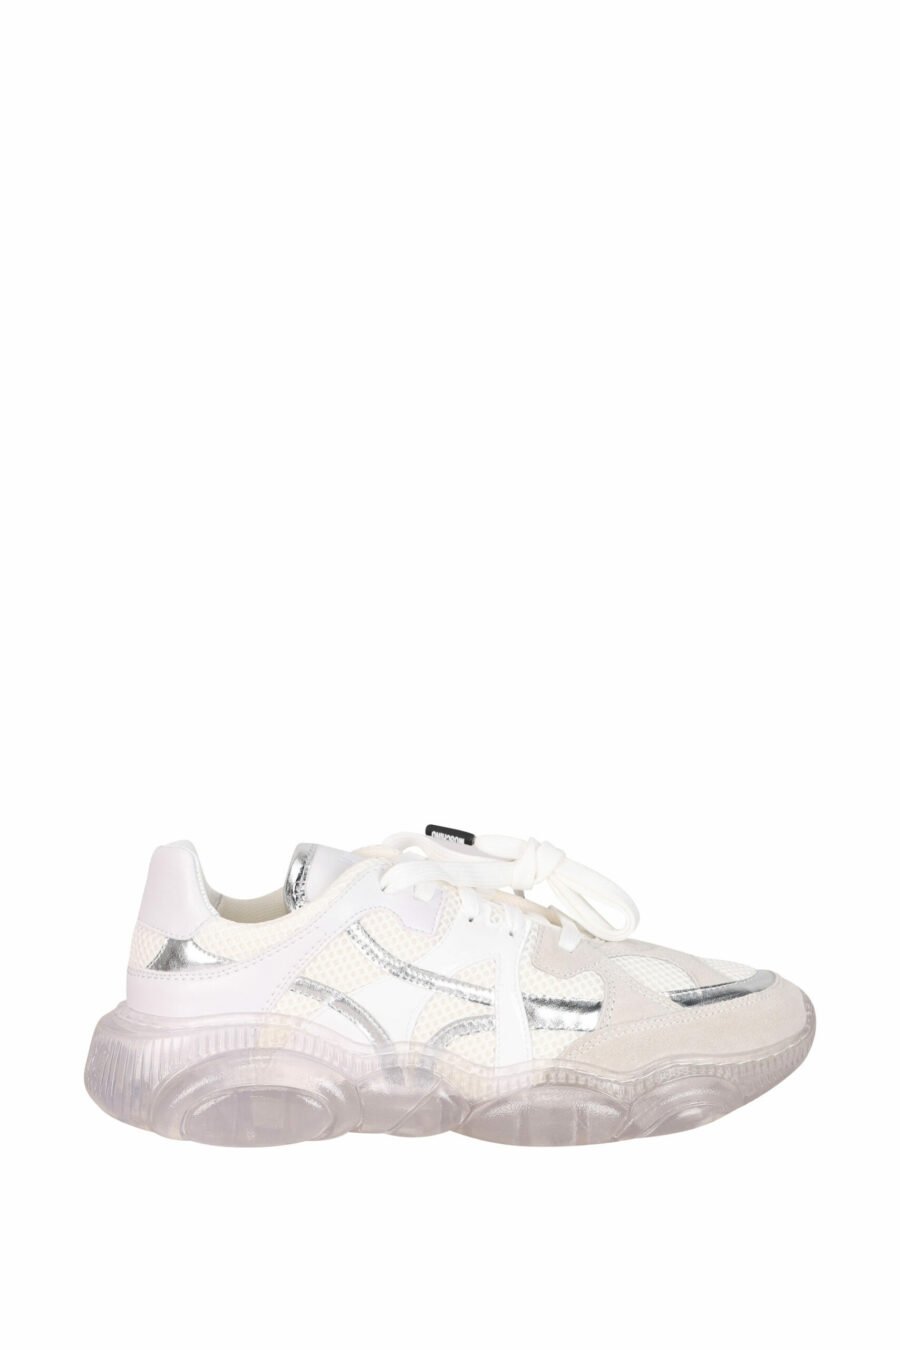 Trainers white mix "orso35" with transparent sole and logo - 8054388533447 scaled